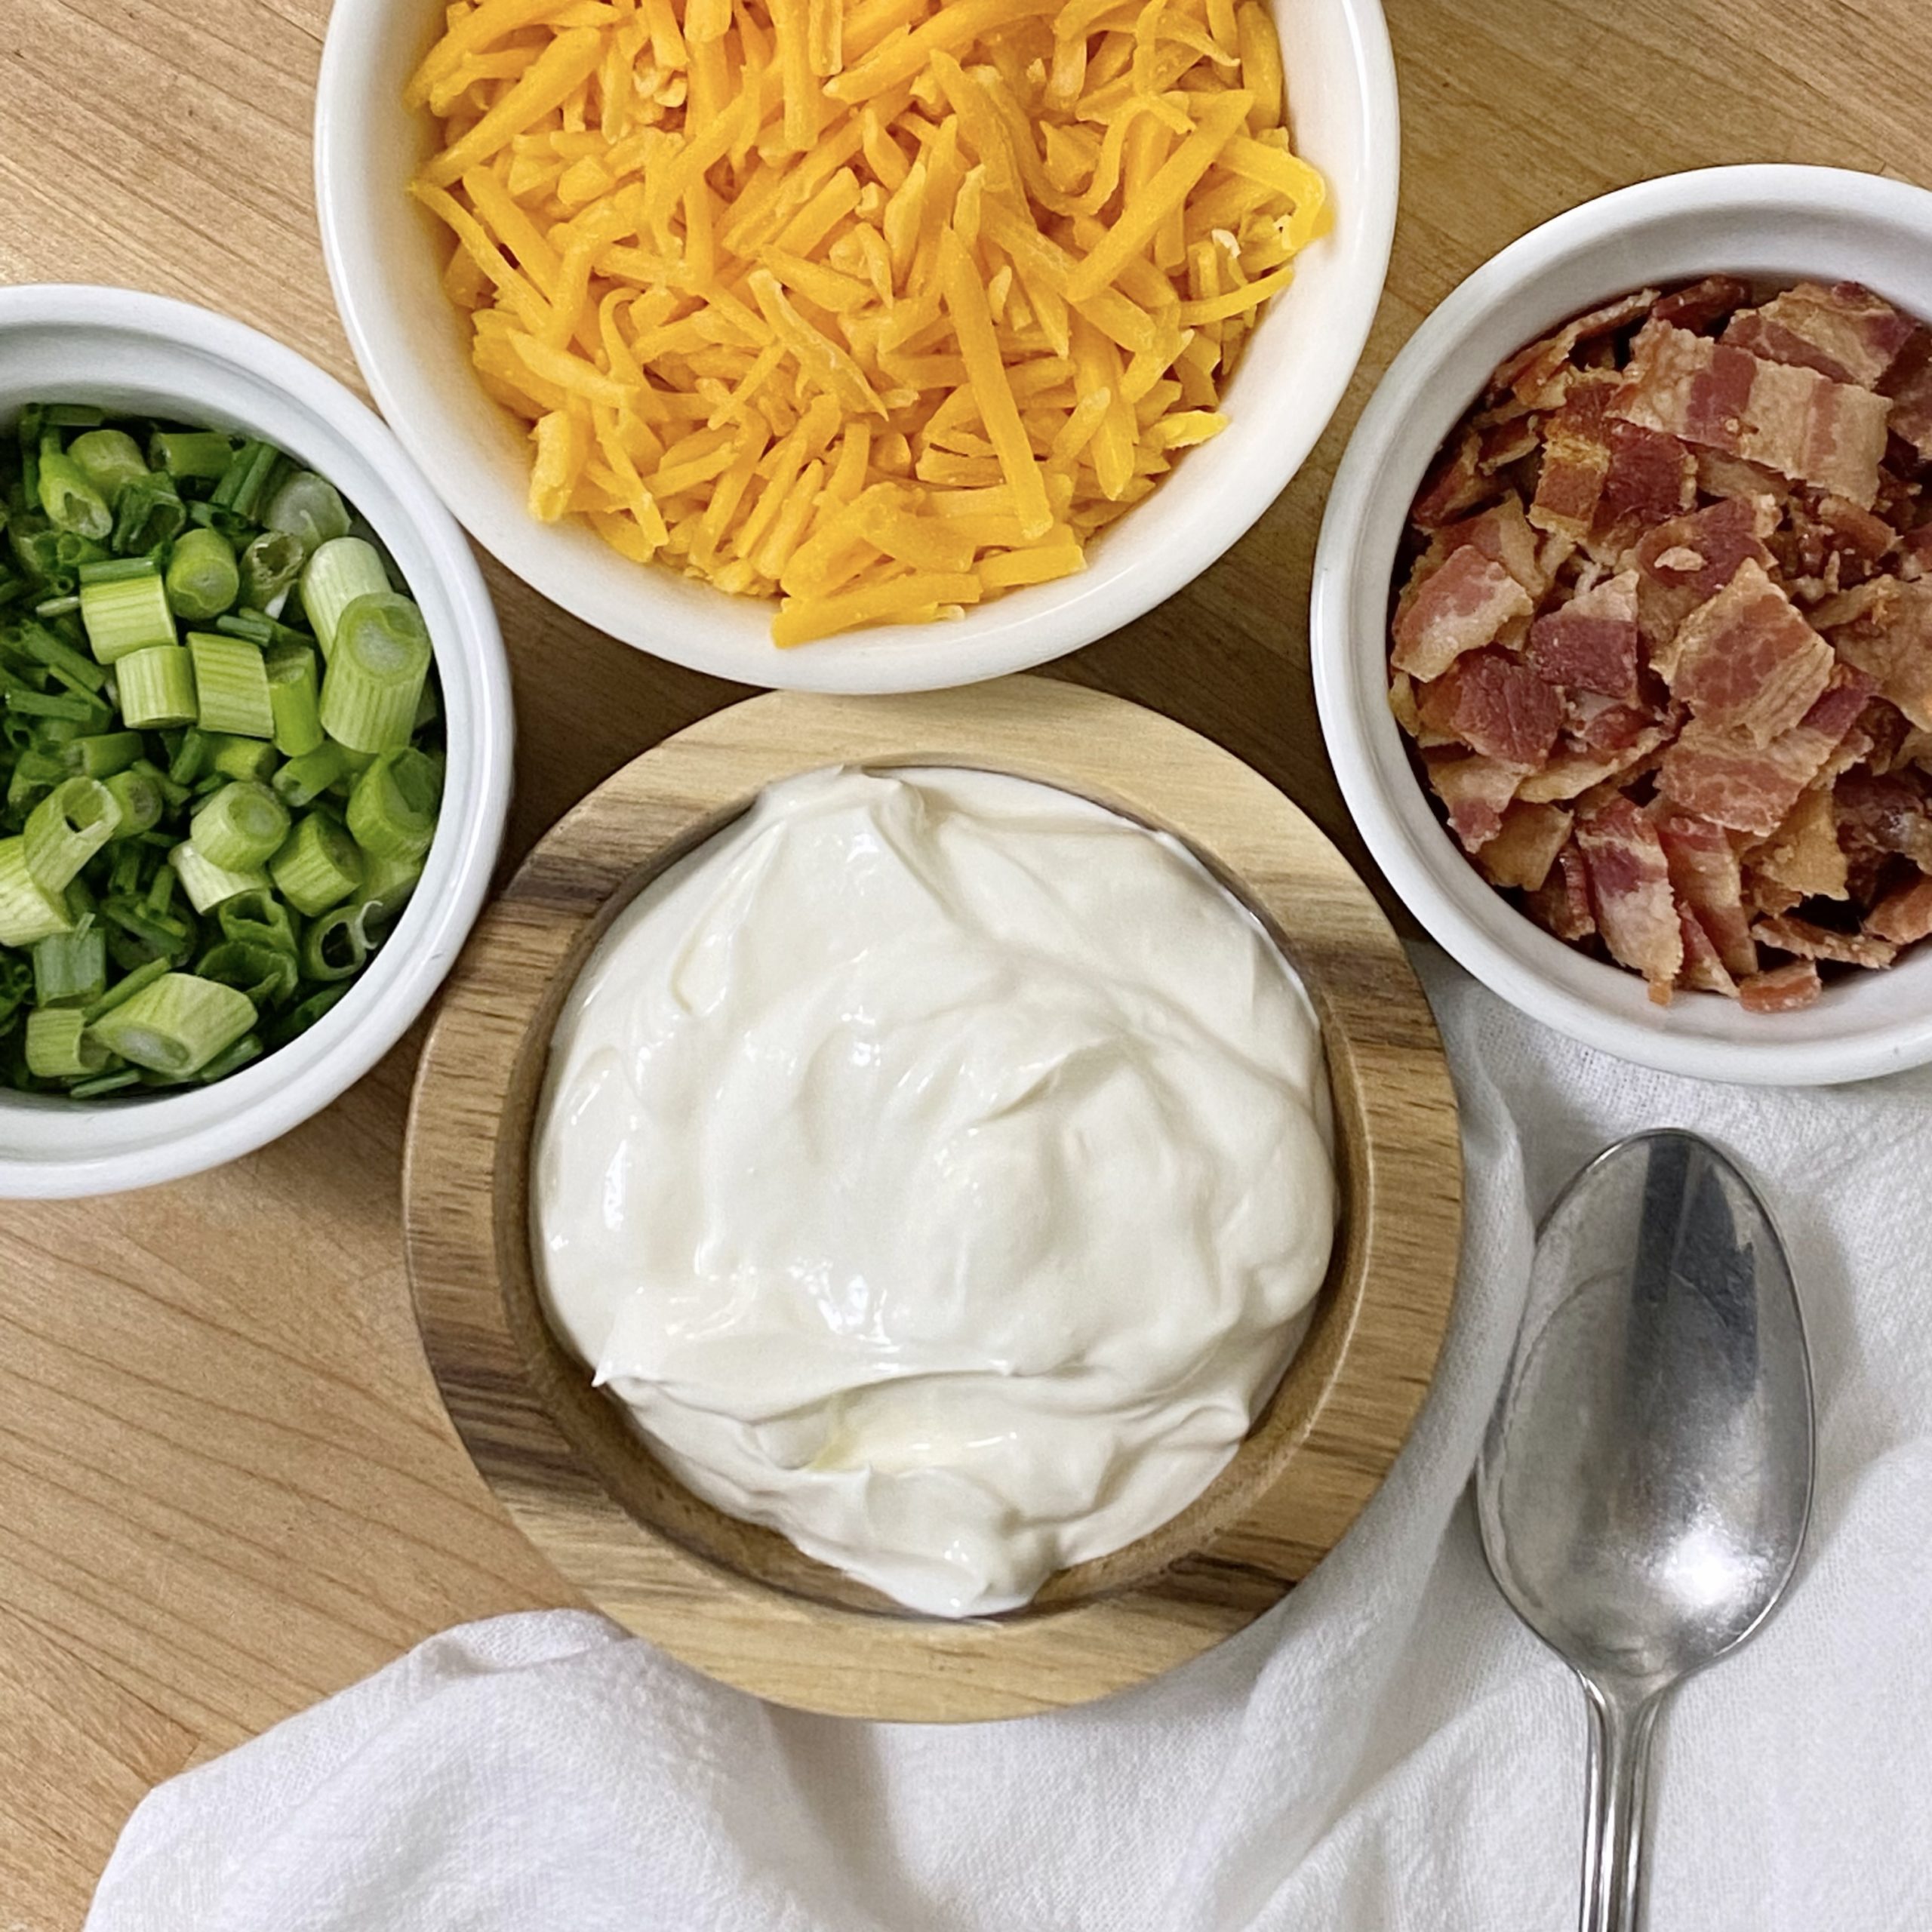 Loaded potato soup toppings including cheddar cheese, crumbled bacon, sour cream, chives and onions with a spoon.